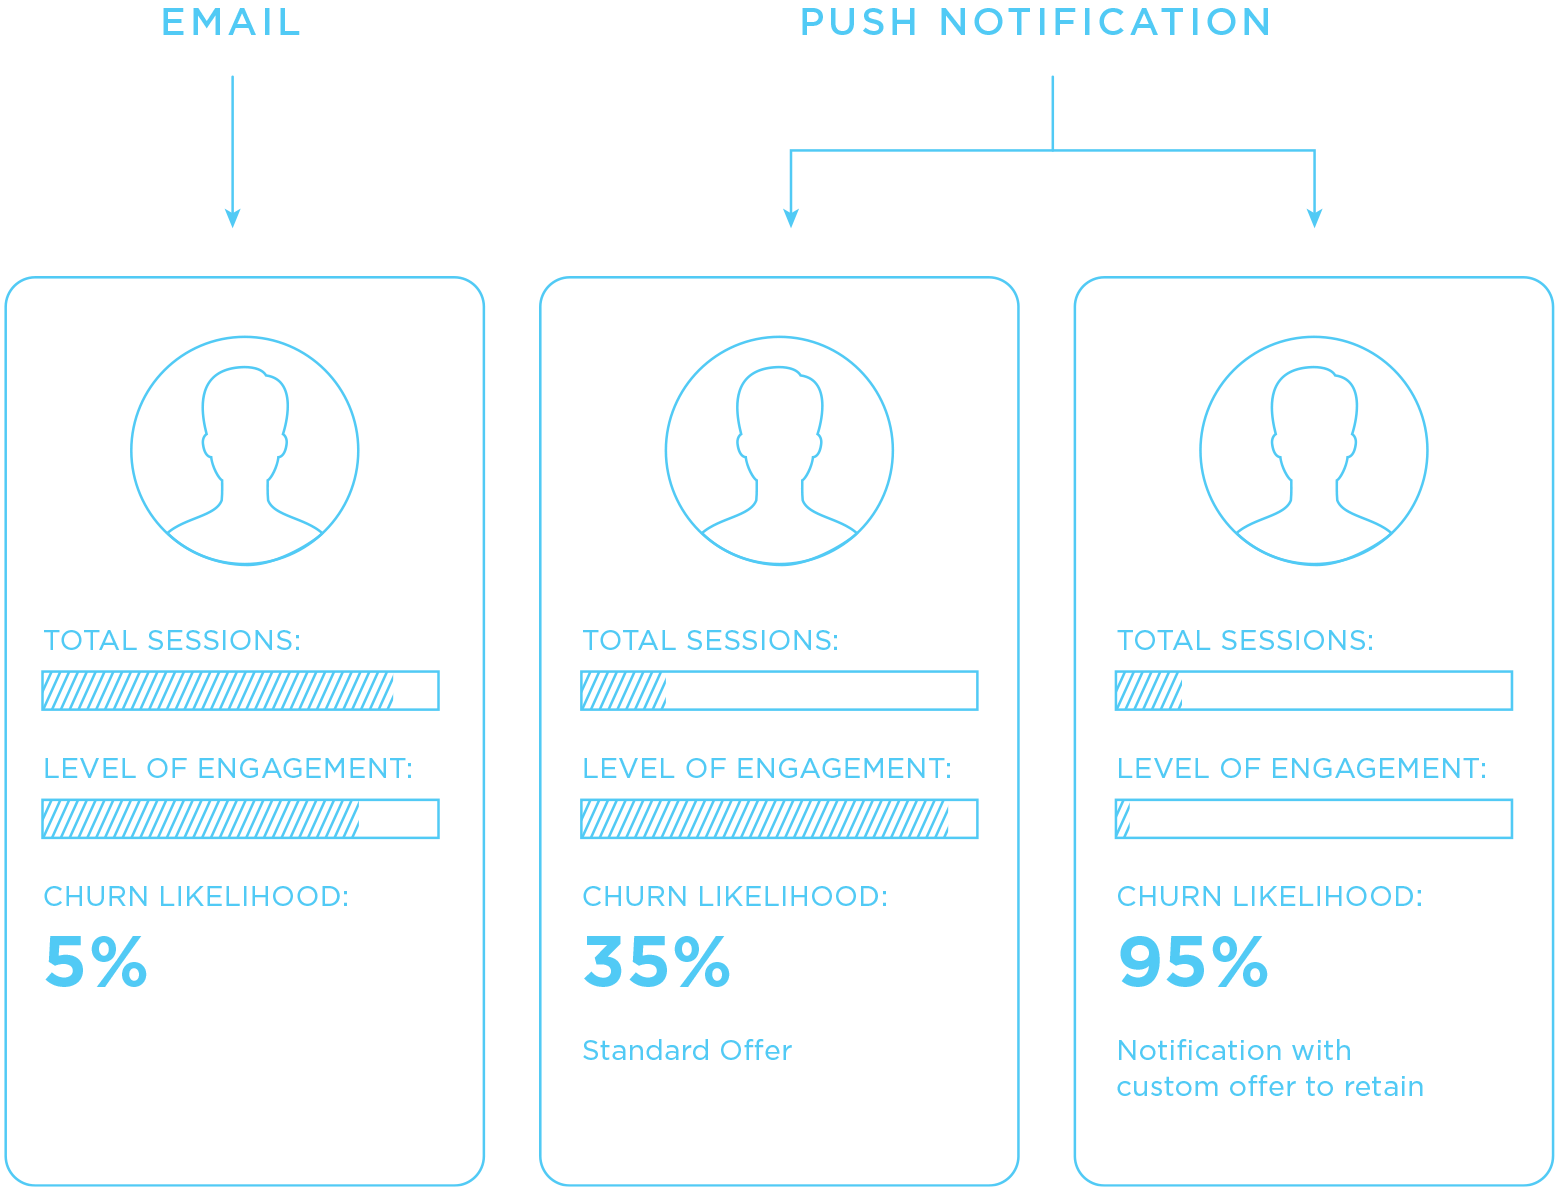 Percentages of churn on email and push notifications